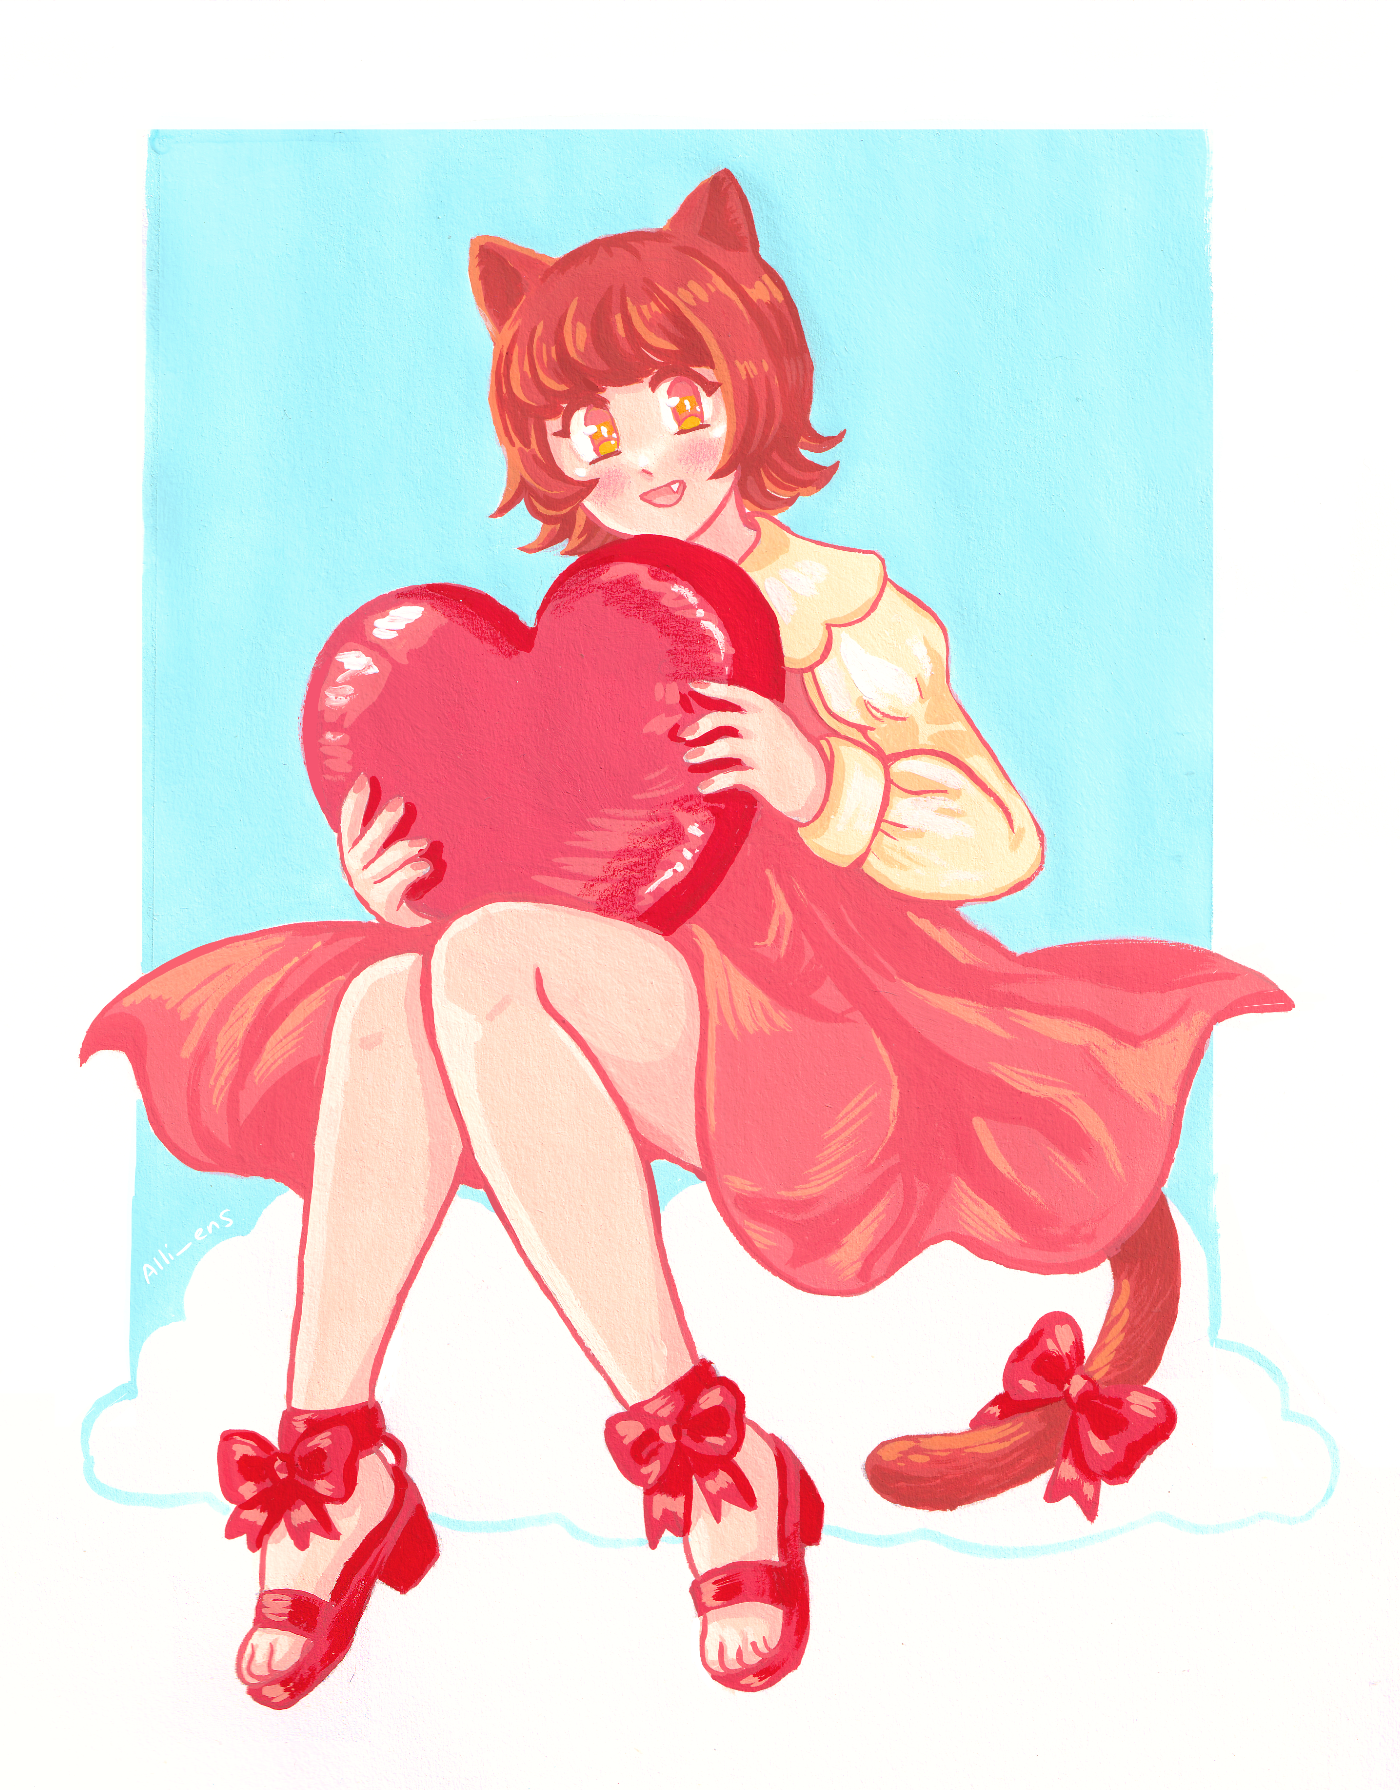 @lemmy7003 's OC Jade for valentines day (hes my bf lol my catgirl in-law) Acryla-goauche, A4